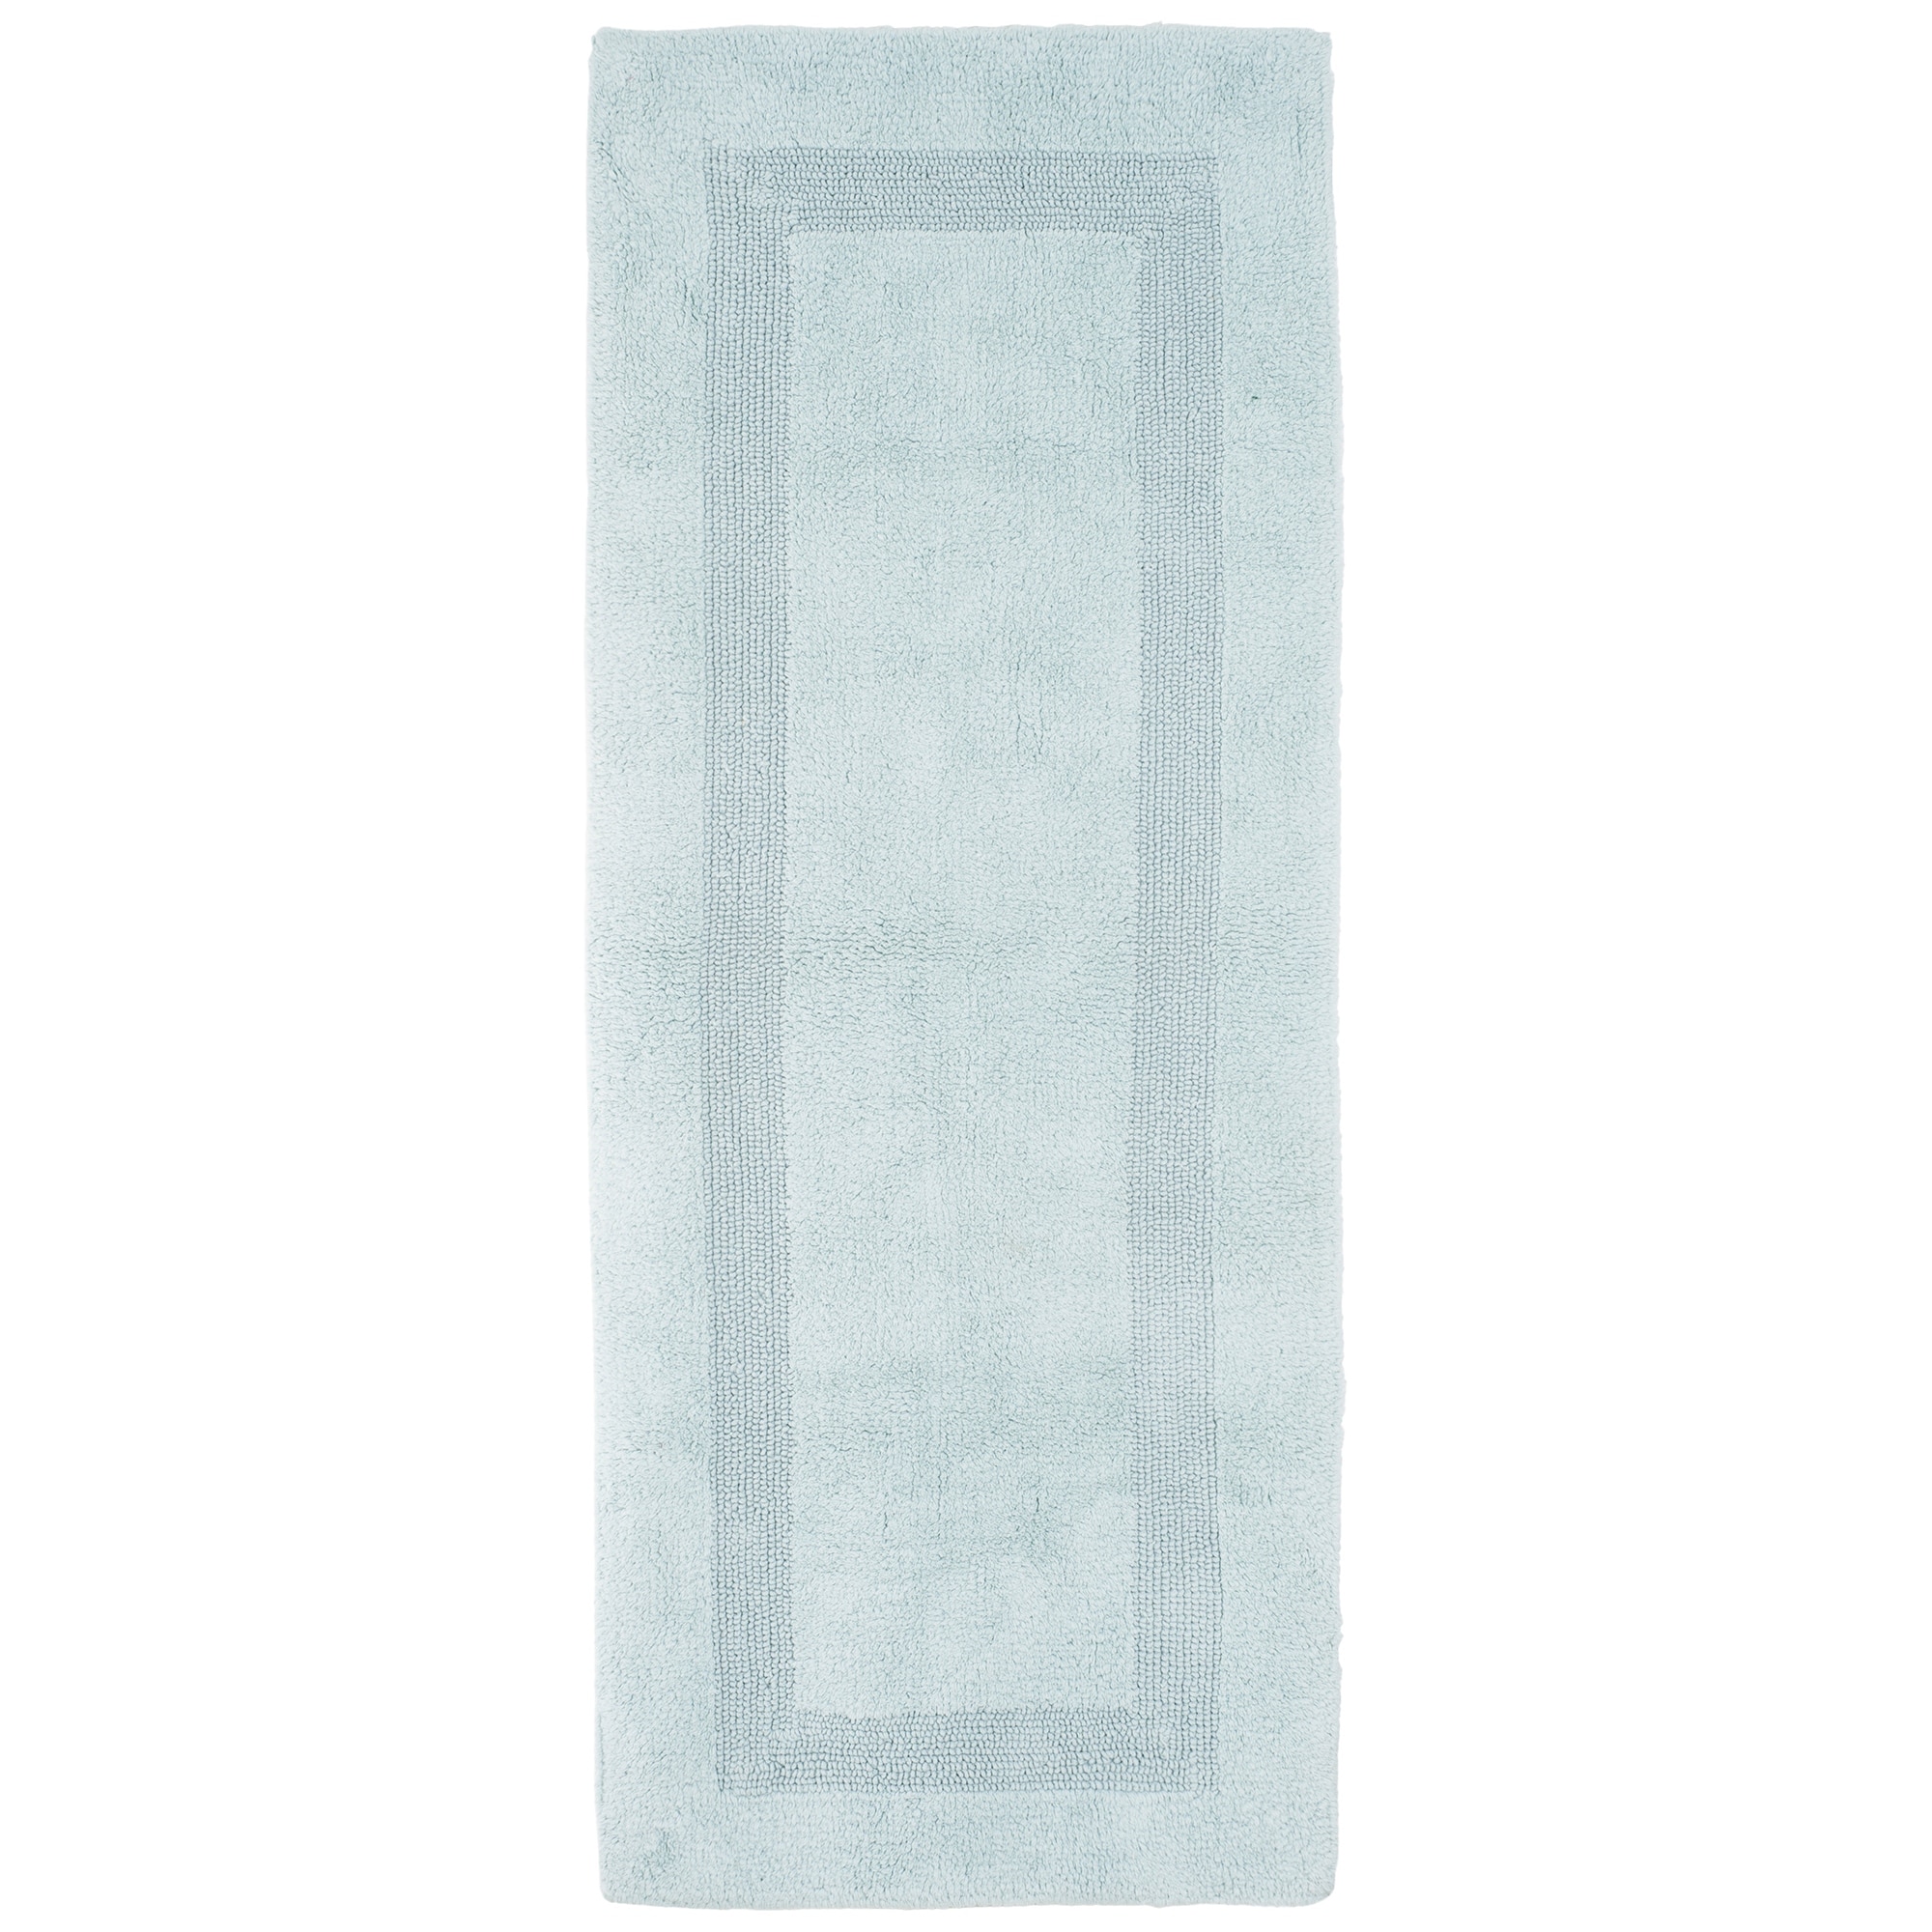 https://ak1.ostkcdn.com/images/products/is/images/direct/bf10c62a2dc6d750e6a39ae5bd95b85ffde5f04a/Bath-Mat---60x24-Inch-Plush-Cotton-Bathroom-Runner-by-Windsor-Home.jpg